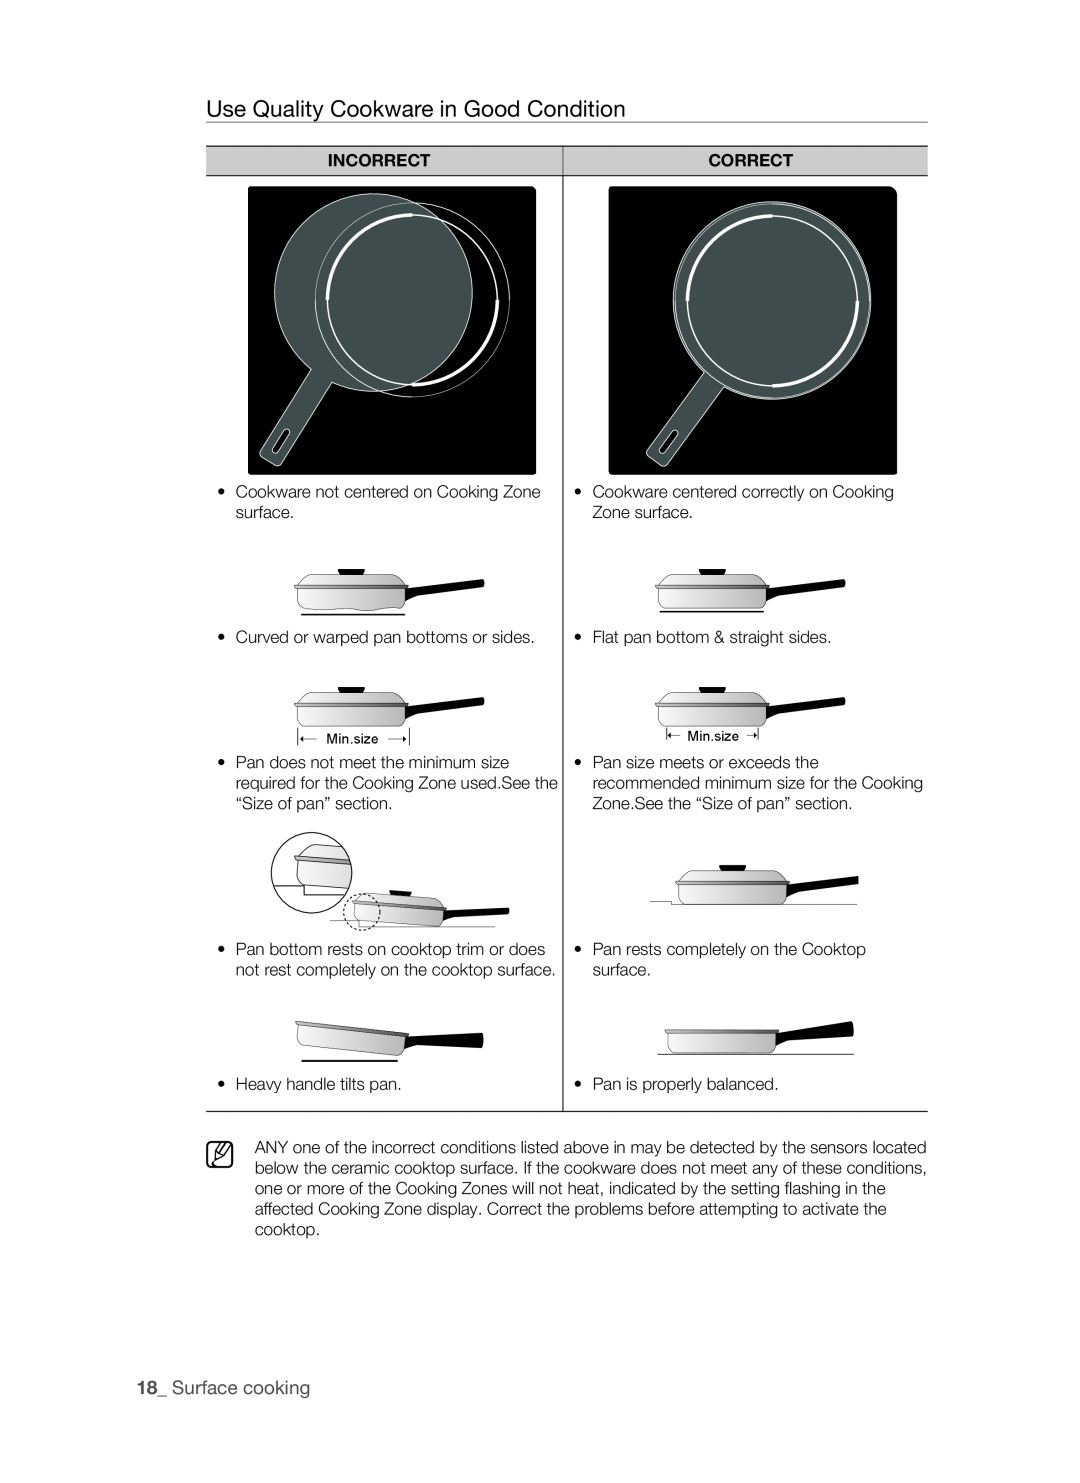 Samsung FTQ307NWGX user manual Surface cooking, Incorrect, Correct 